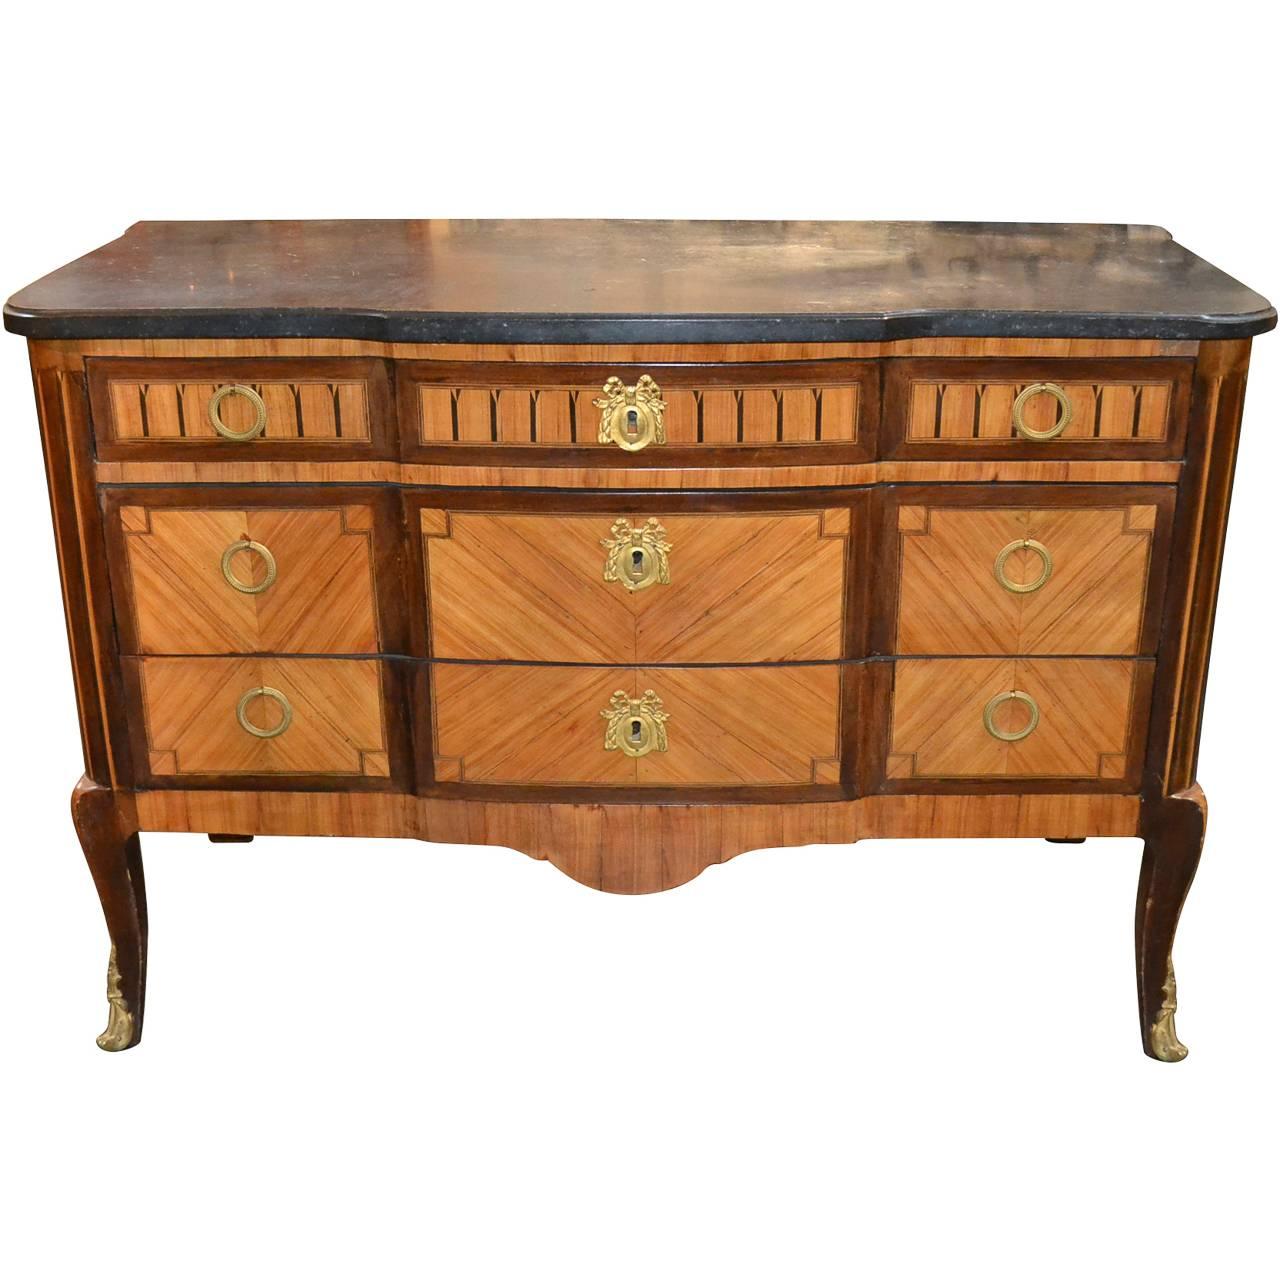 19th Century French Transitional Inlaid Commode